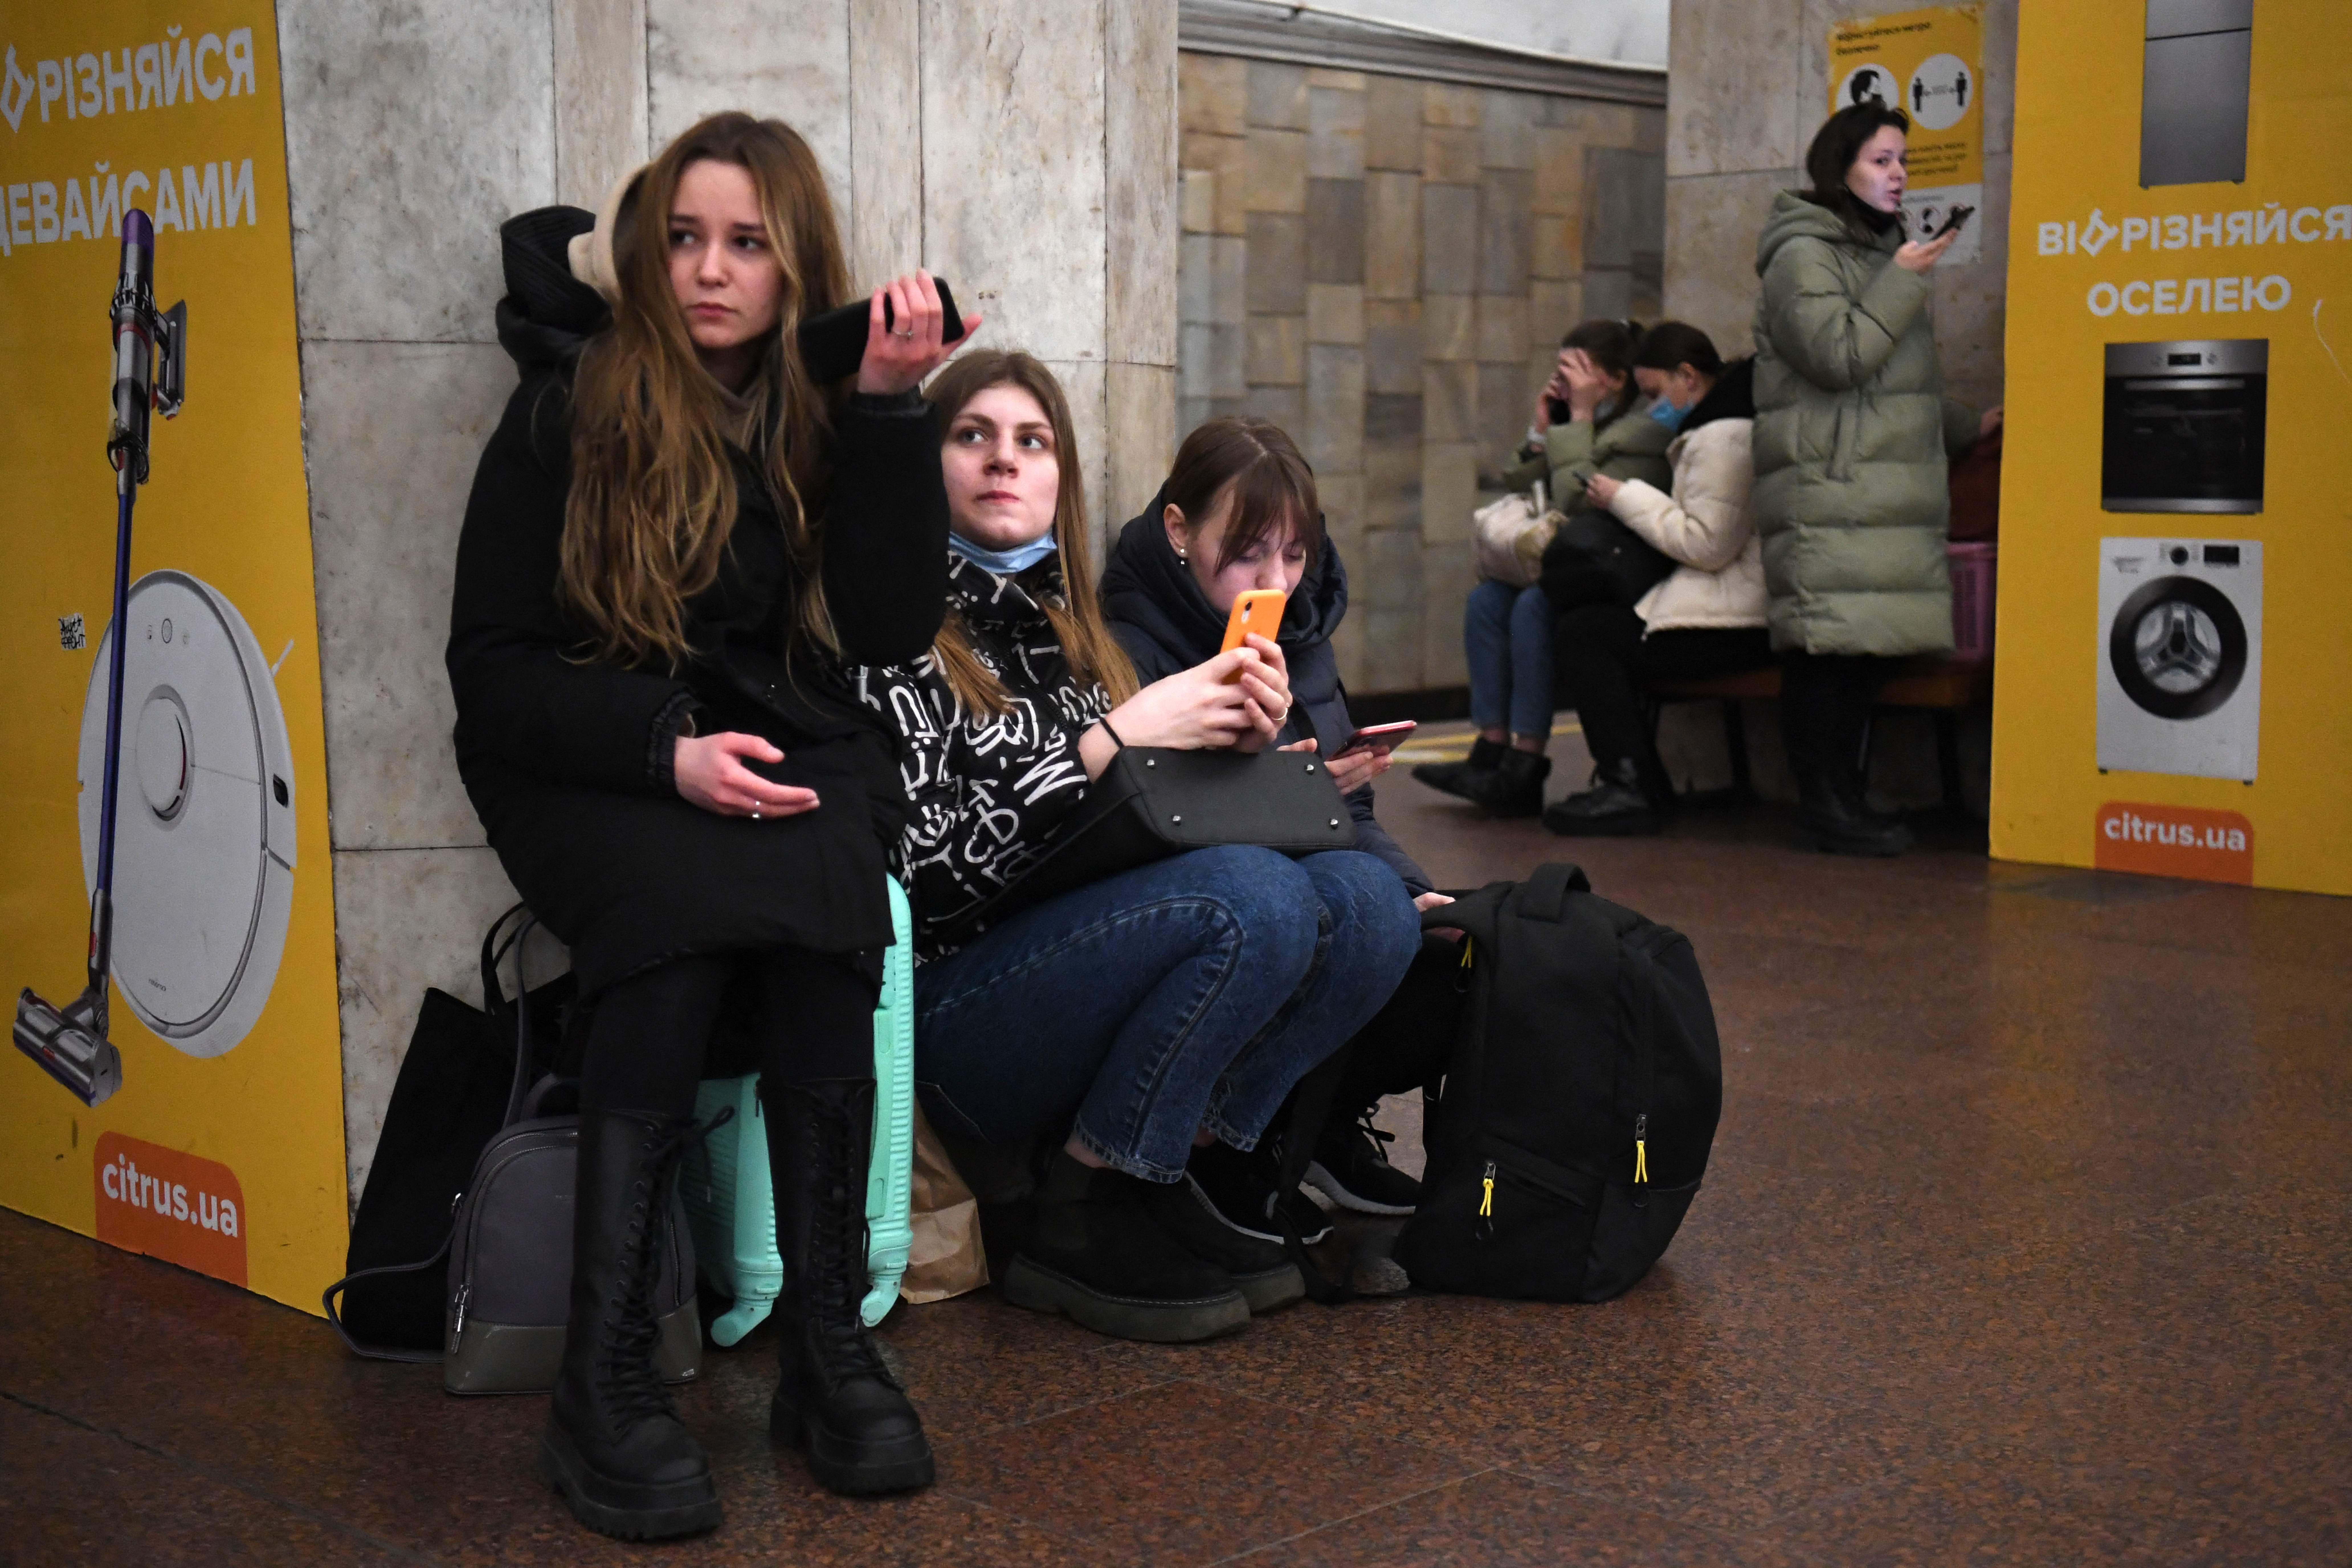 People take refuge in a metro station in Kyiv on Thursday morning. Photo: DANIEL LEAL/AFP via Getty Images